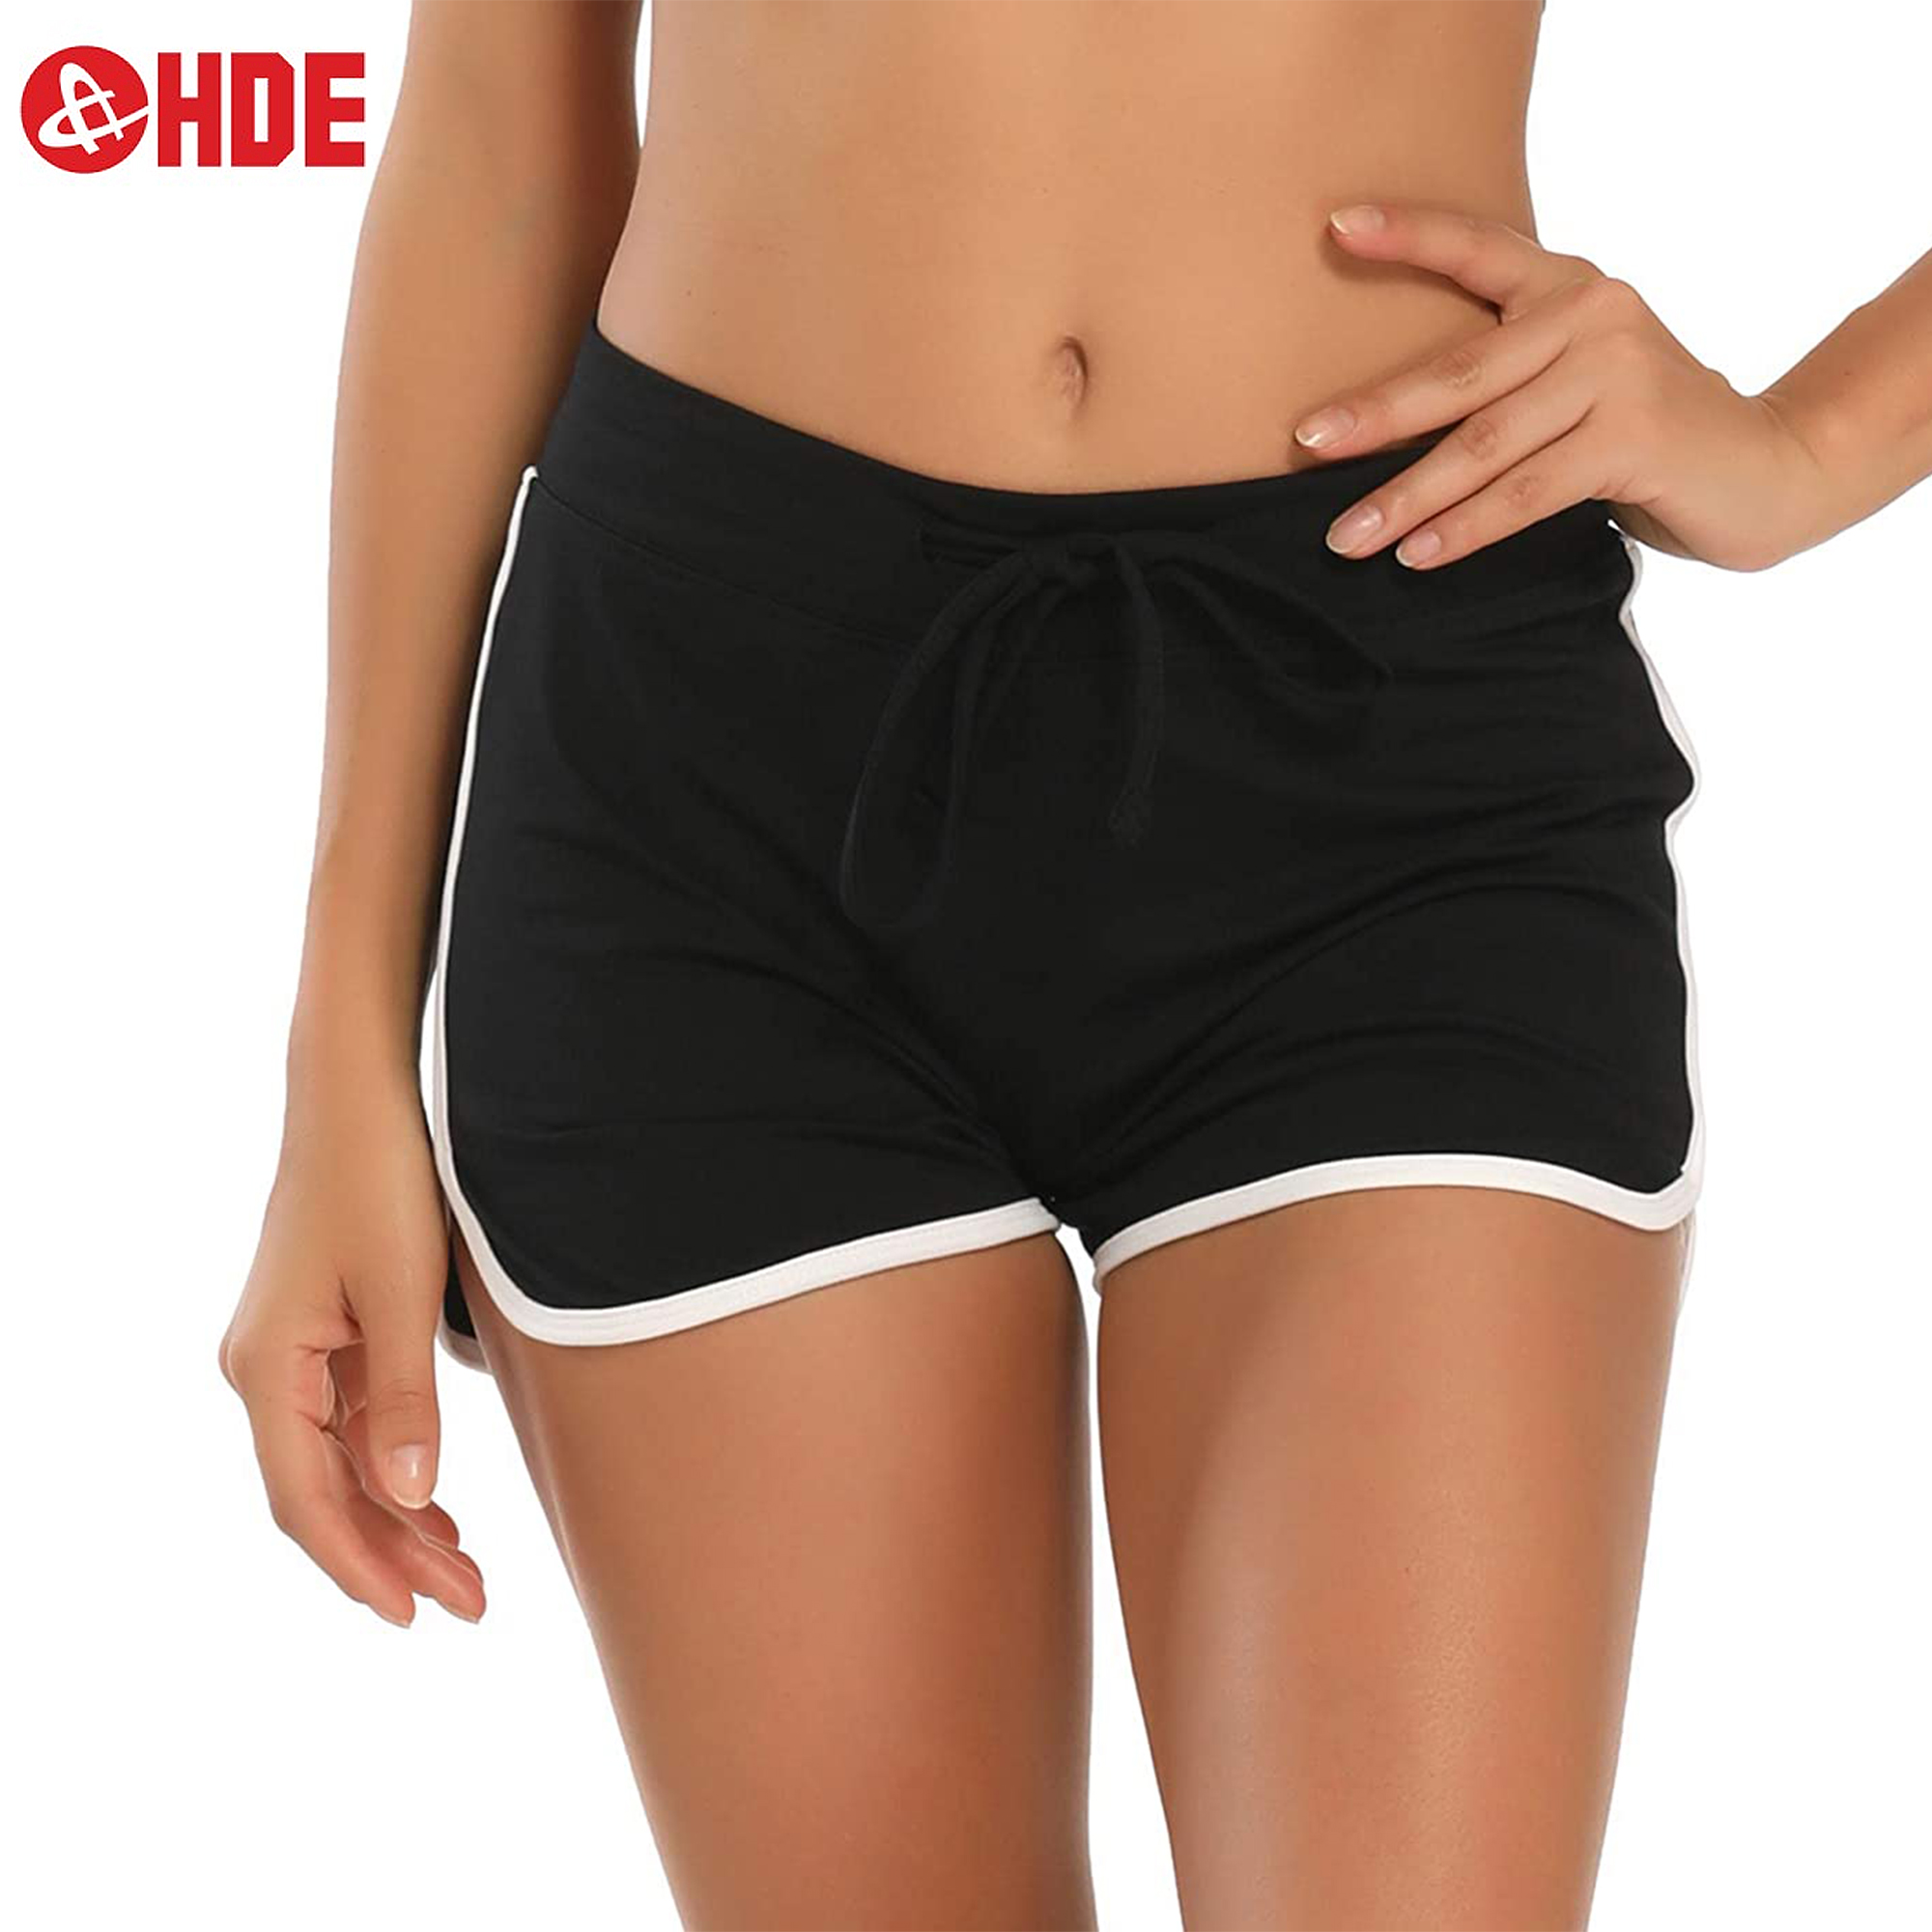 HDE Women Dolphin Shorts Running Workout Clothes Black Small - image 3 of 9